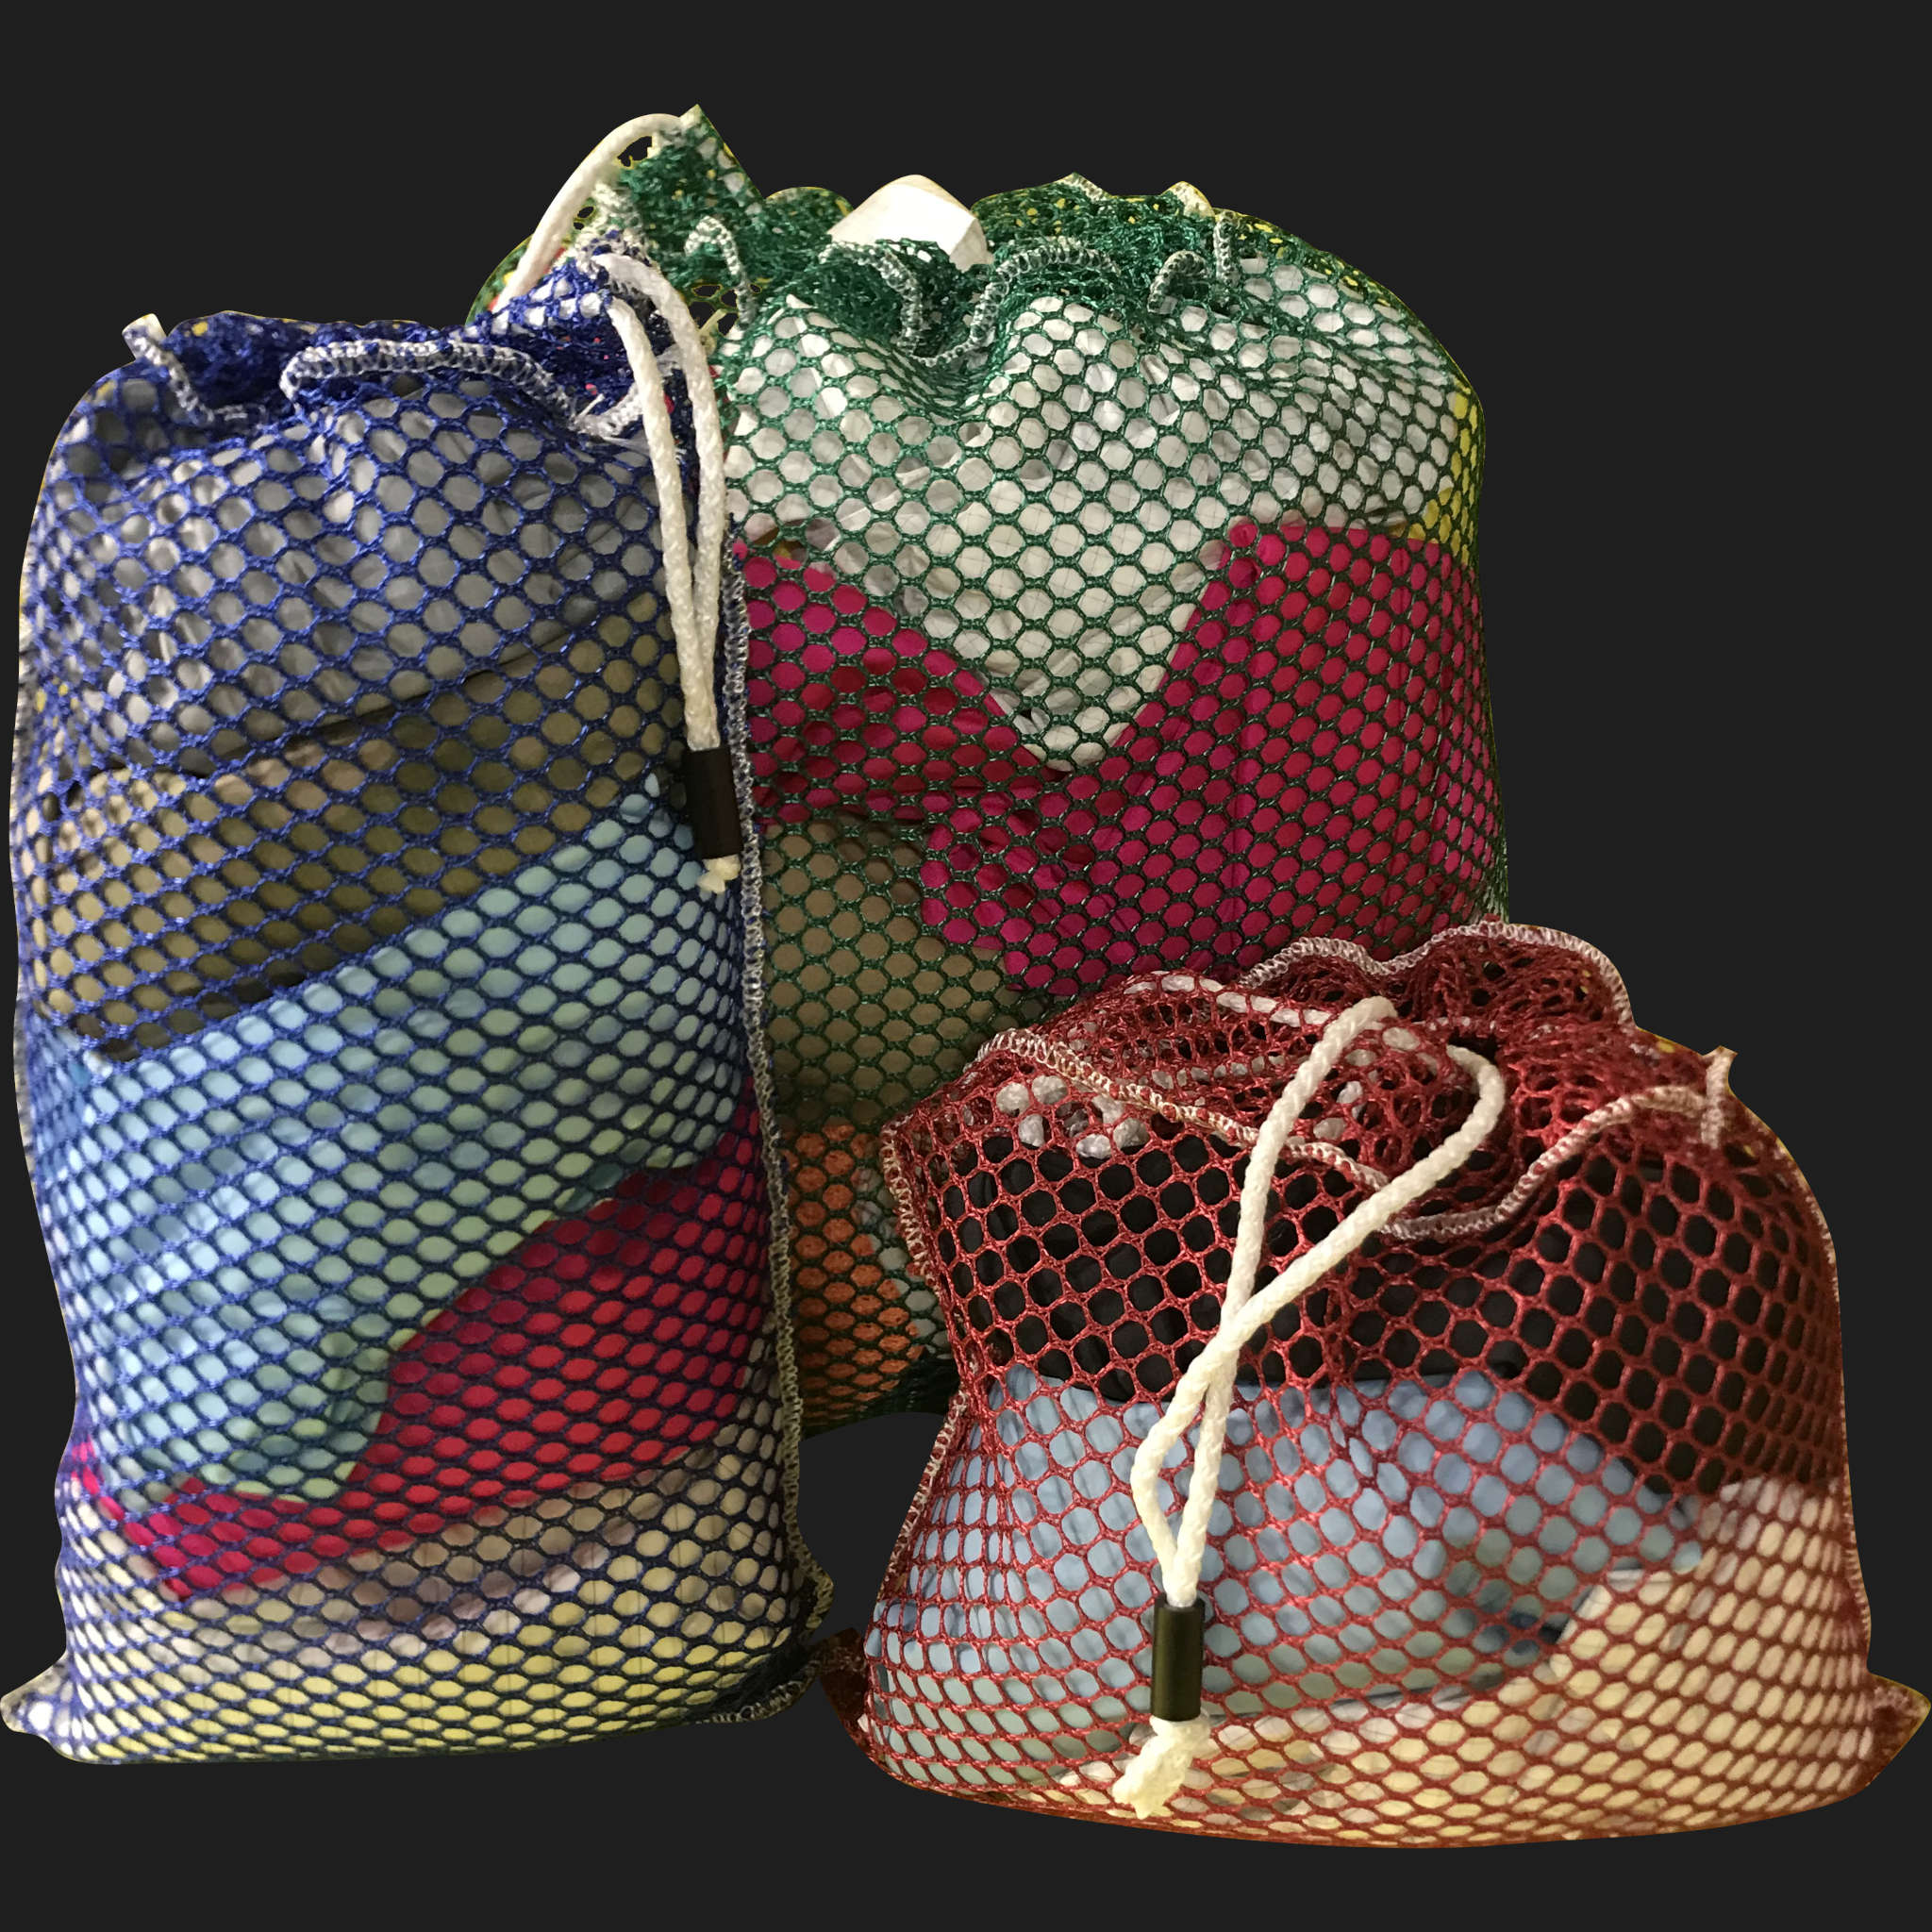 24" x 36" Customized Mesh-Net-Laundry Bags Heavy Duty with Cord and barrellock closure